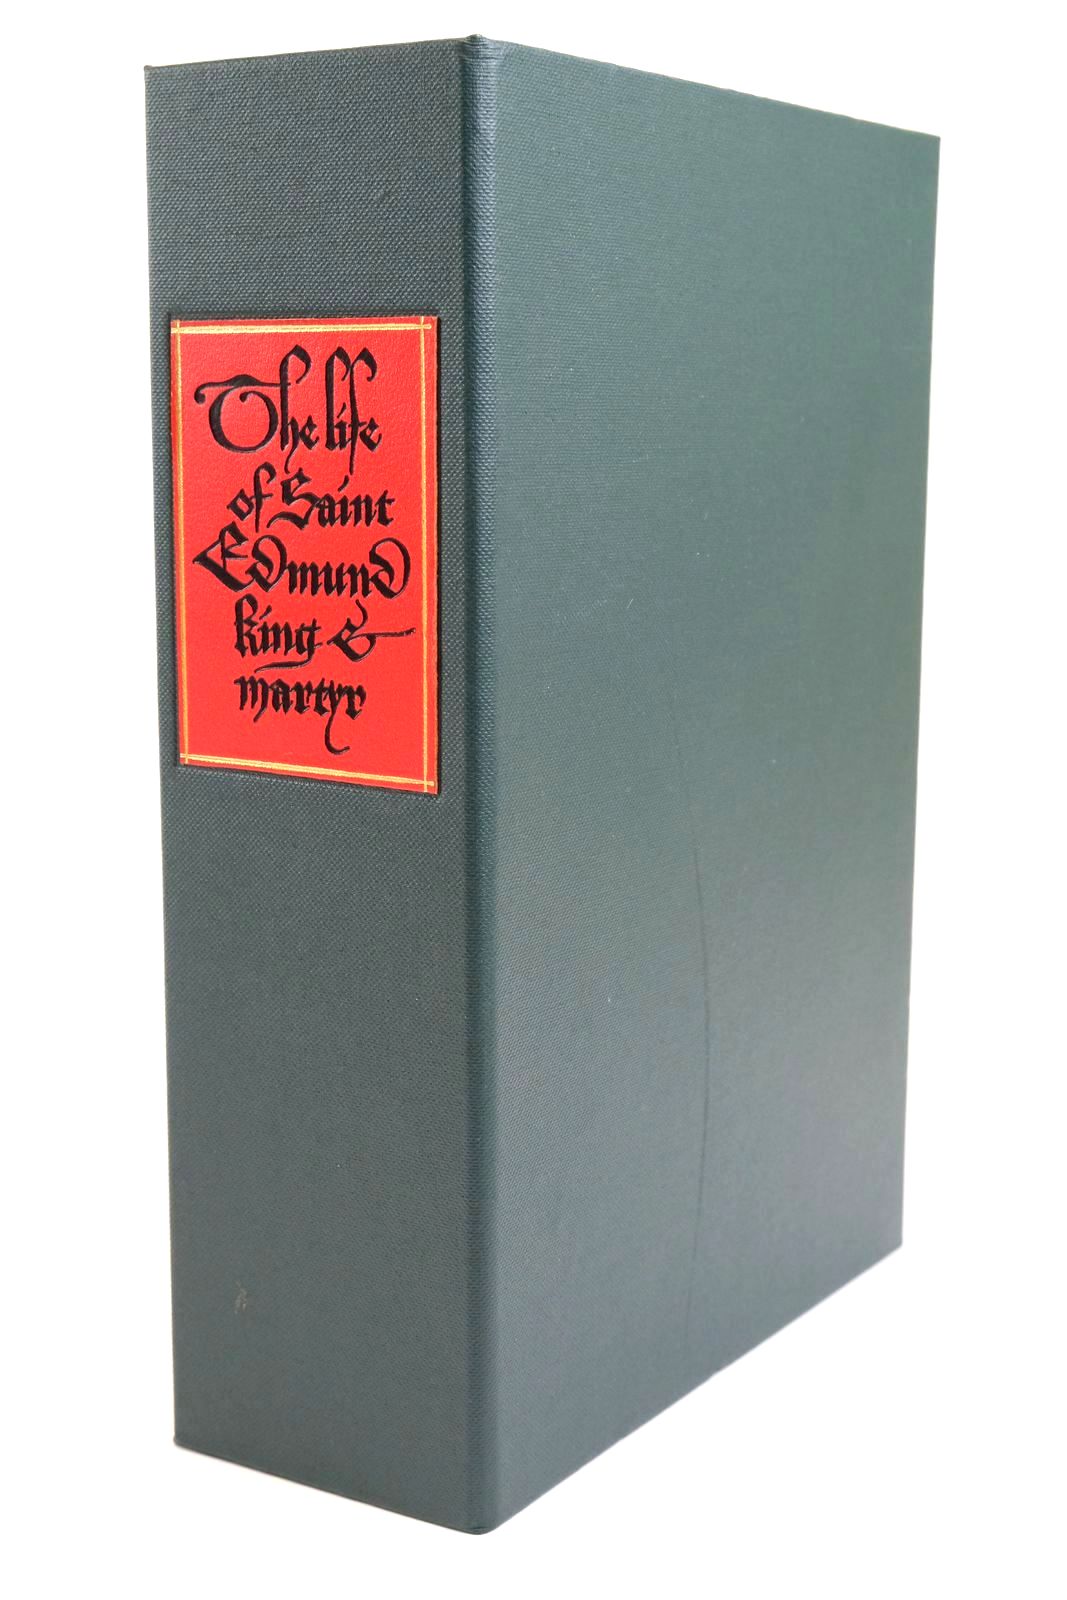 Photo of THE LIFE OF SAINT EDMUND KING &amp; MARTYR written by Lydgate, John Edwards, A.S.G. published by Folio Society (STOCK CODE: 1321648)  for sale by Stella & Rose's Books